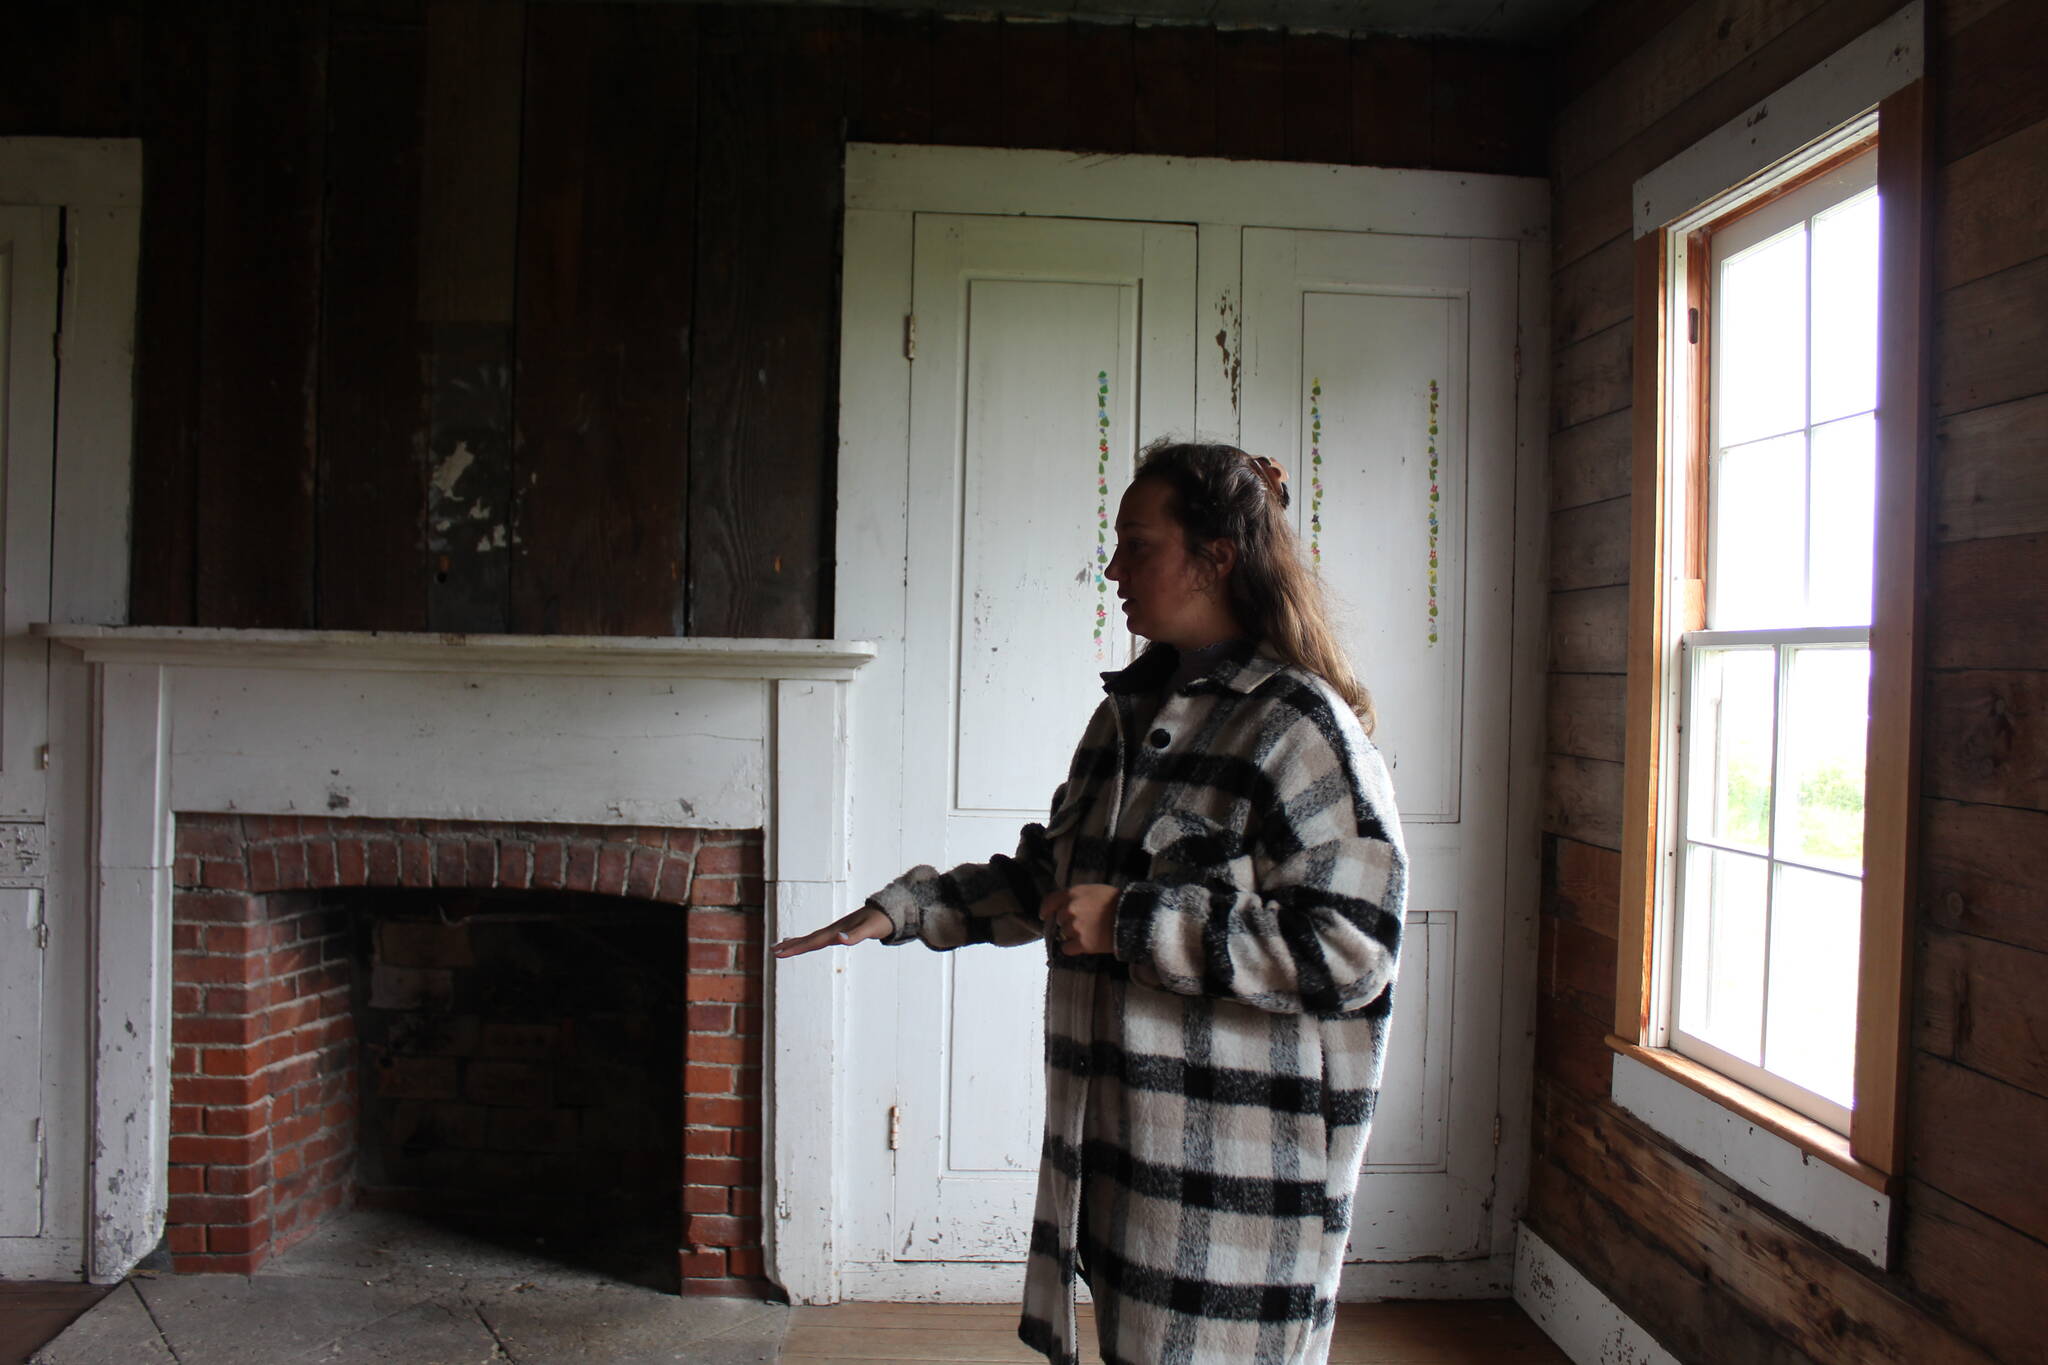 Reserve education and outreach coordinator Jordan Belcher shows the former dining room of the Jacob and Sarah Ebey House. (Photo by Karina Andrew/Whidbey News-Times)